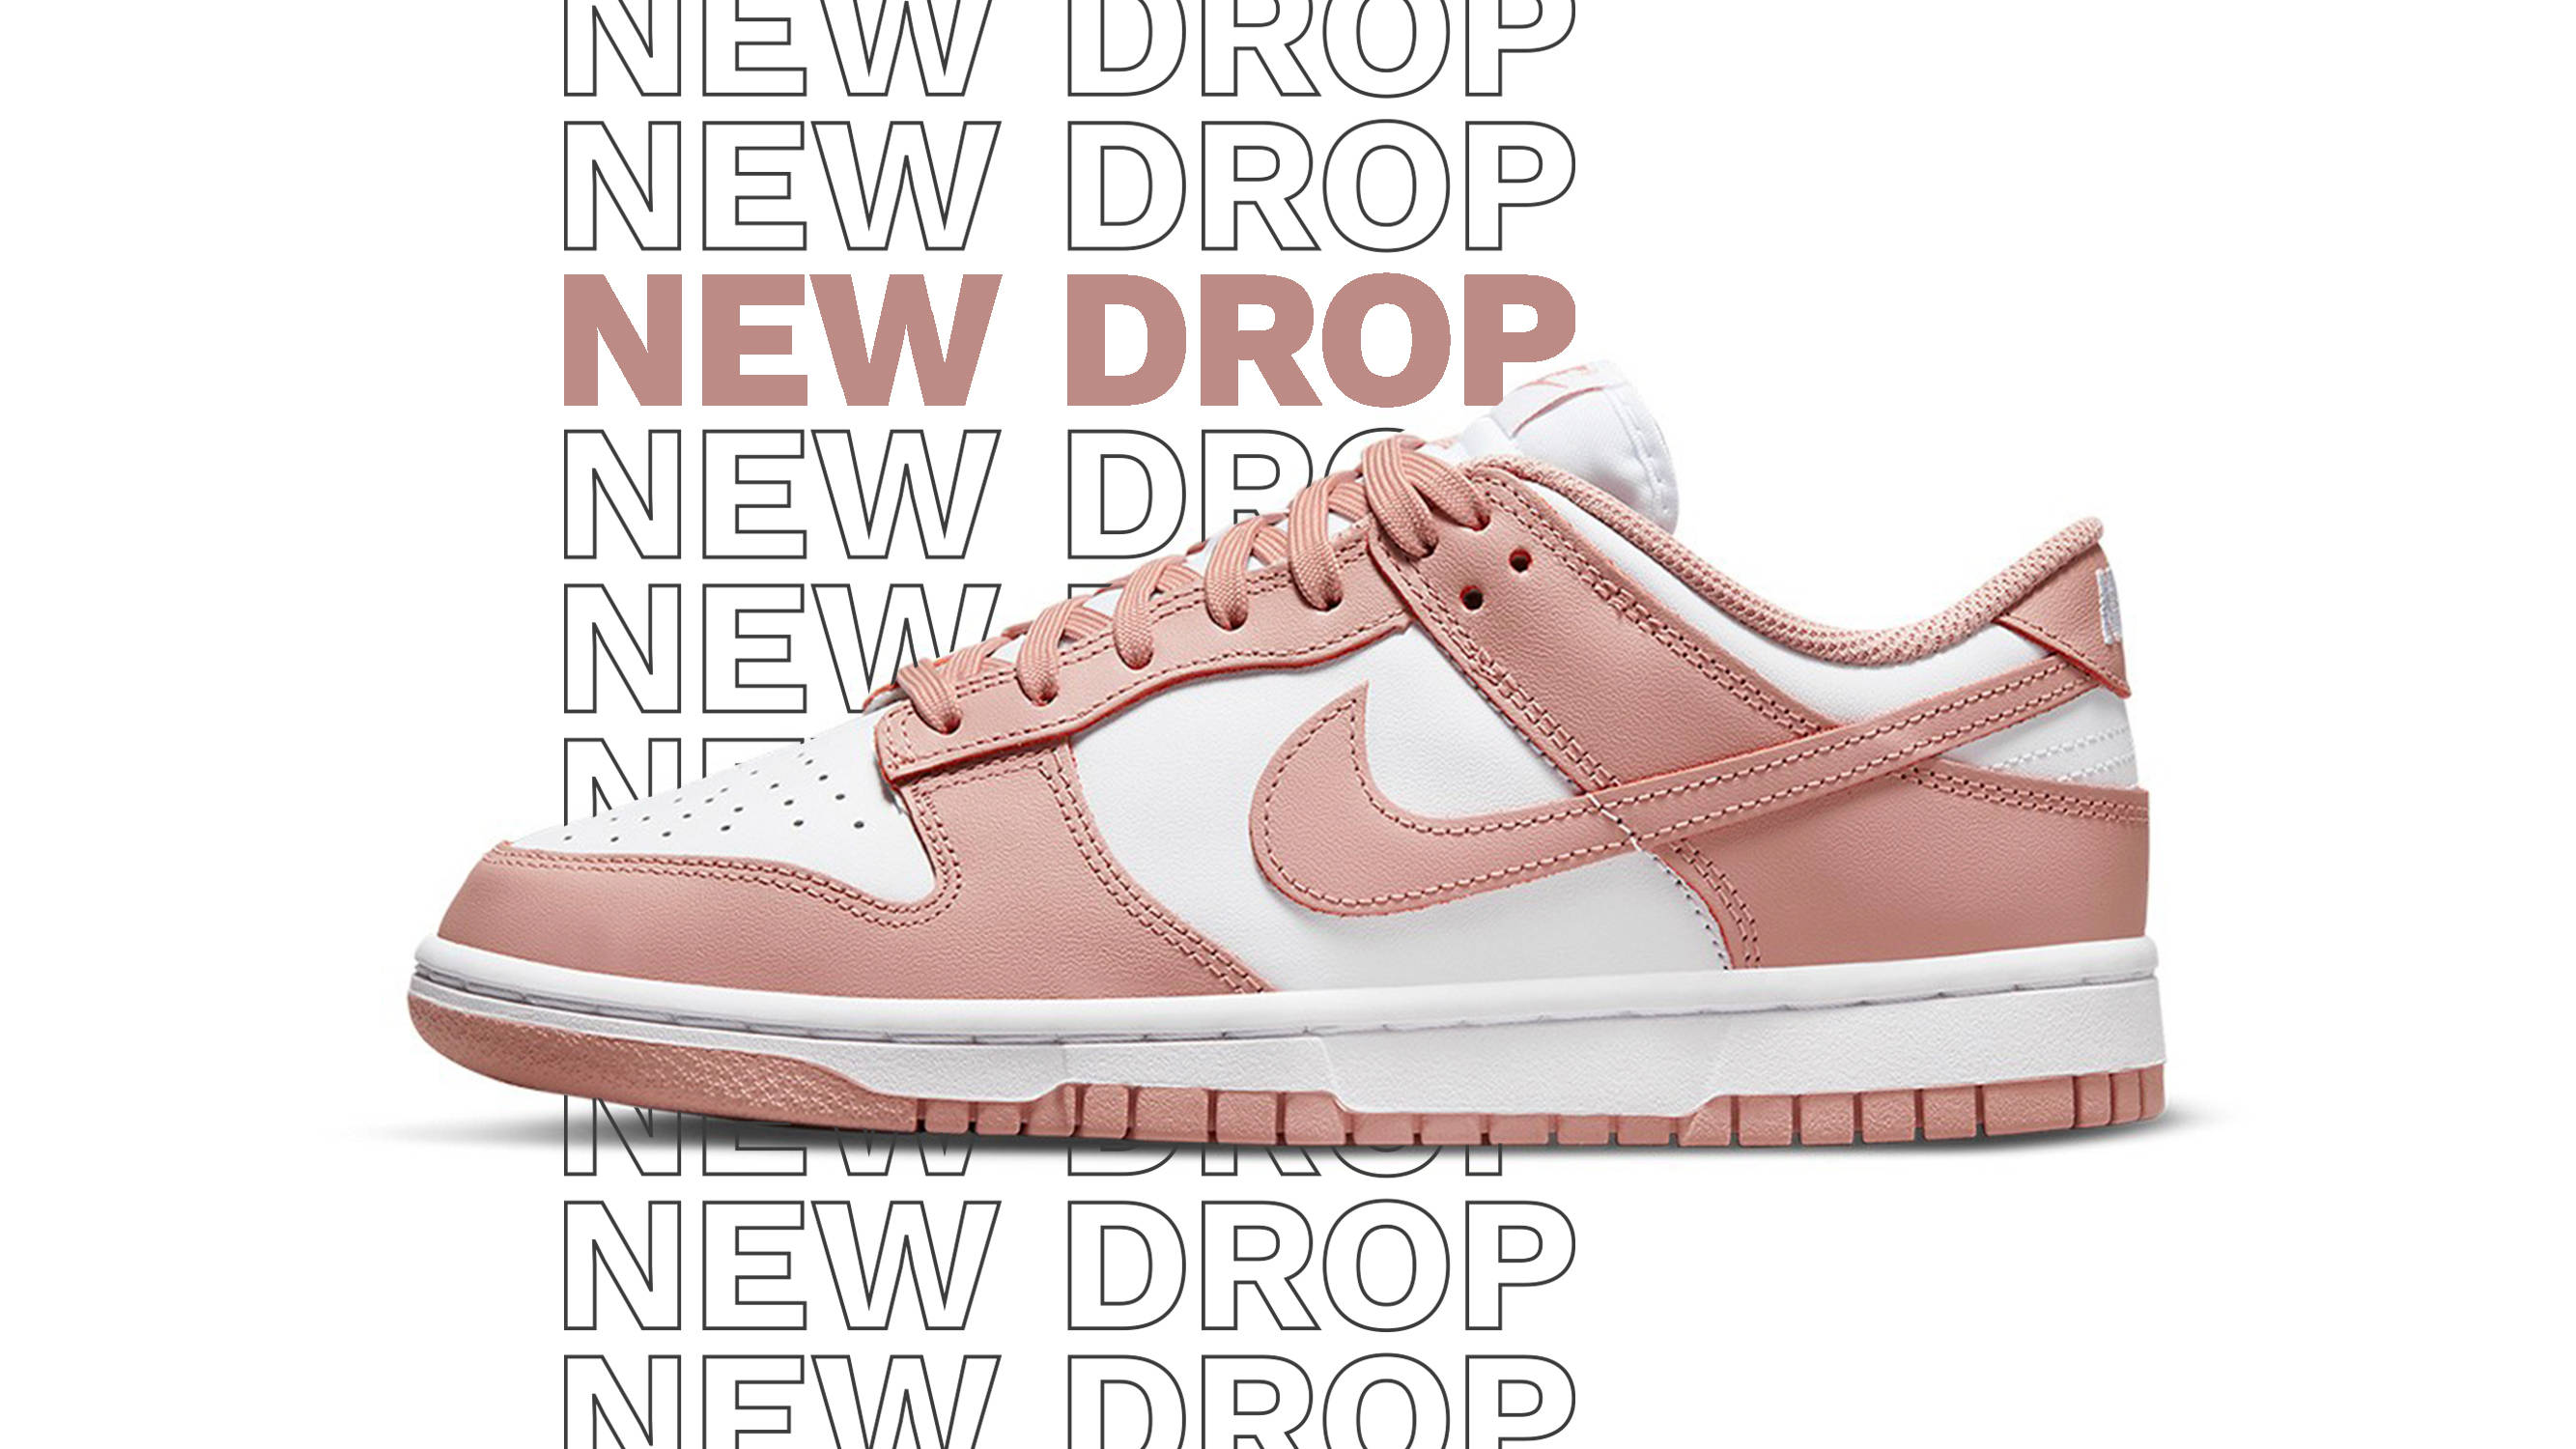 Official Images of the Nike Dunk Low "Rose Whisper" Have Arrived The